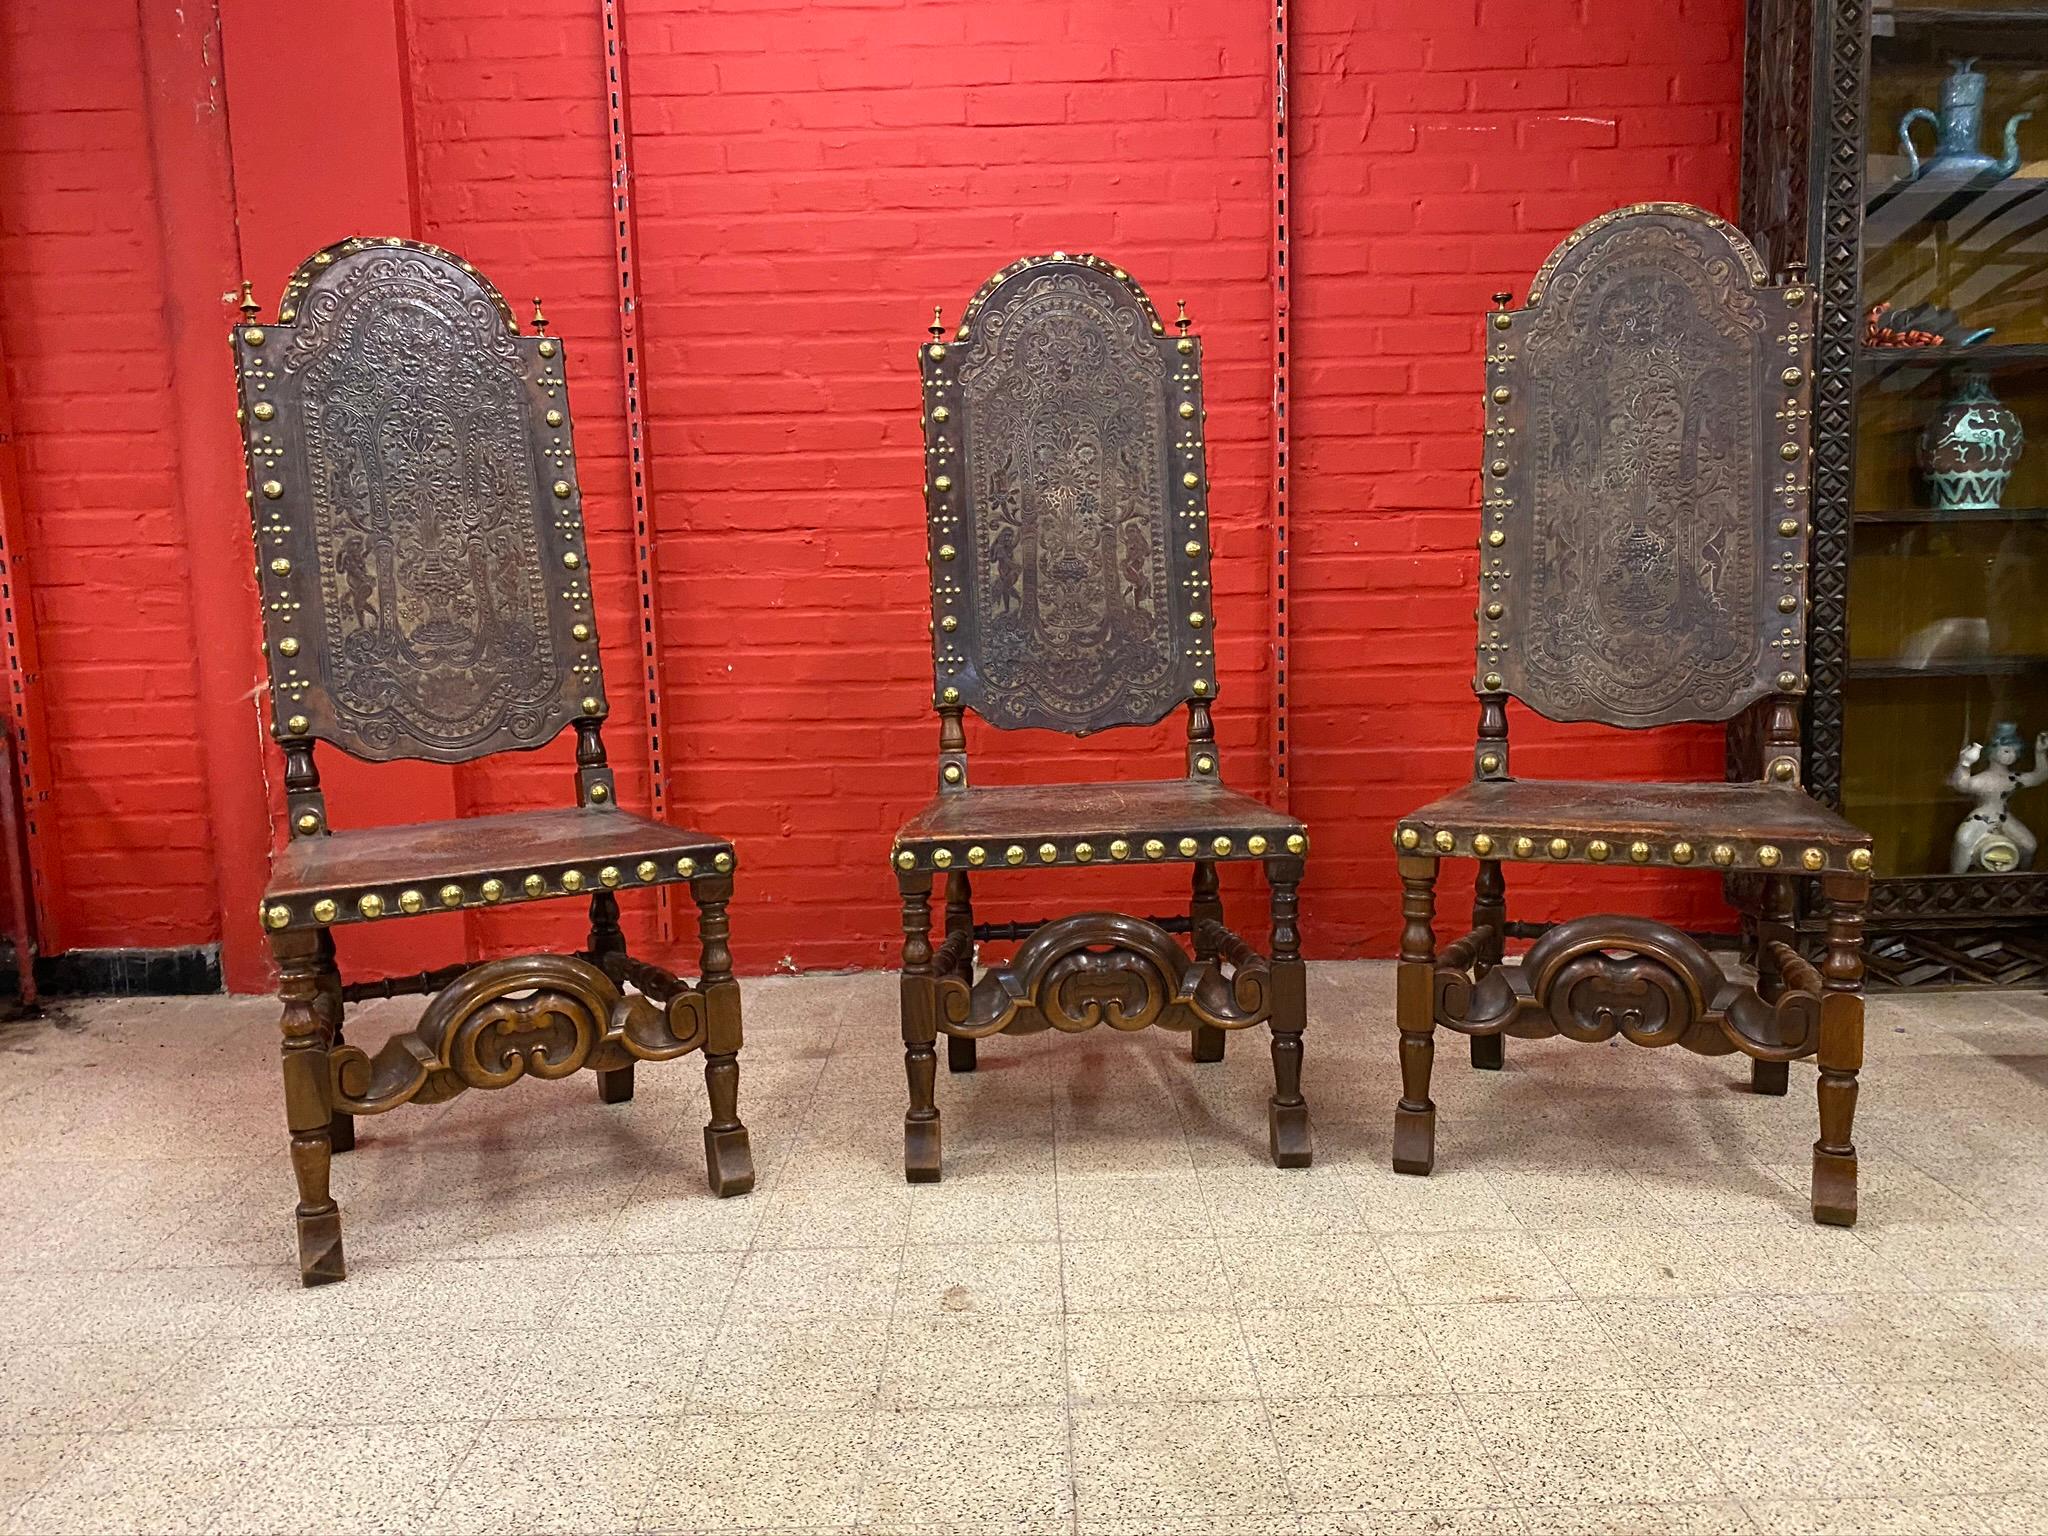 3 high-backed chairs, Cordoba leather trim with Native American decor and cupids framing a floral arrangement.
Ornamentation of copper cabochons on the border.
Spain 19th century.
Provenance: Chateau de S ..... (center of France)
small wear and